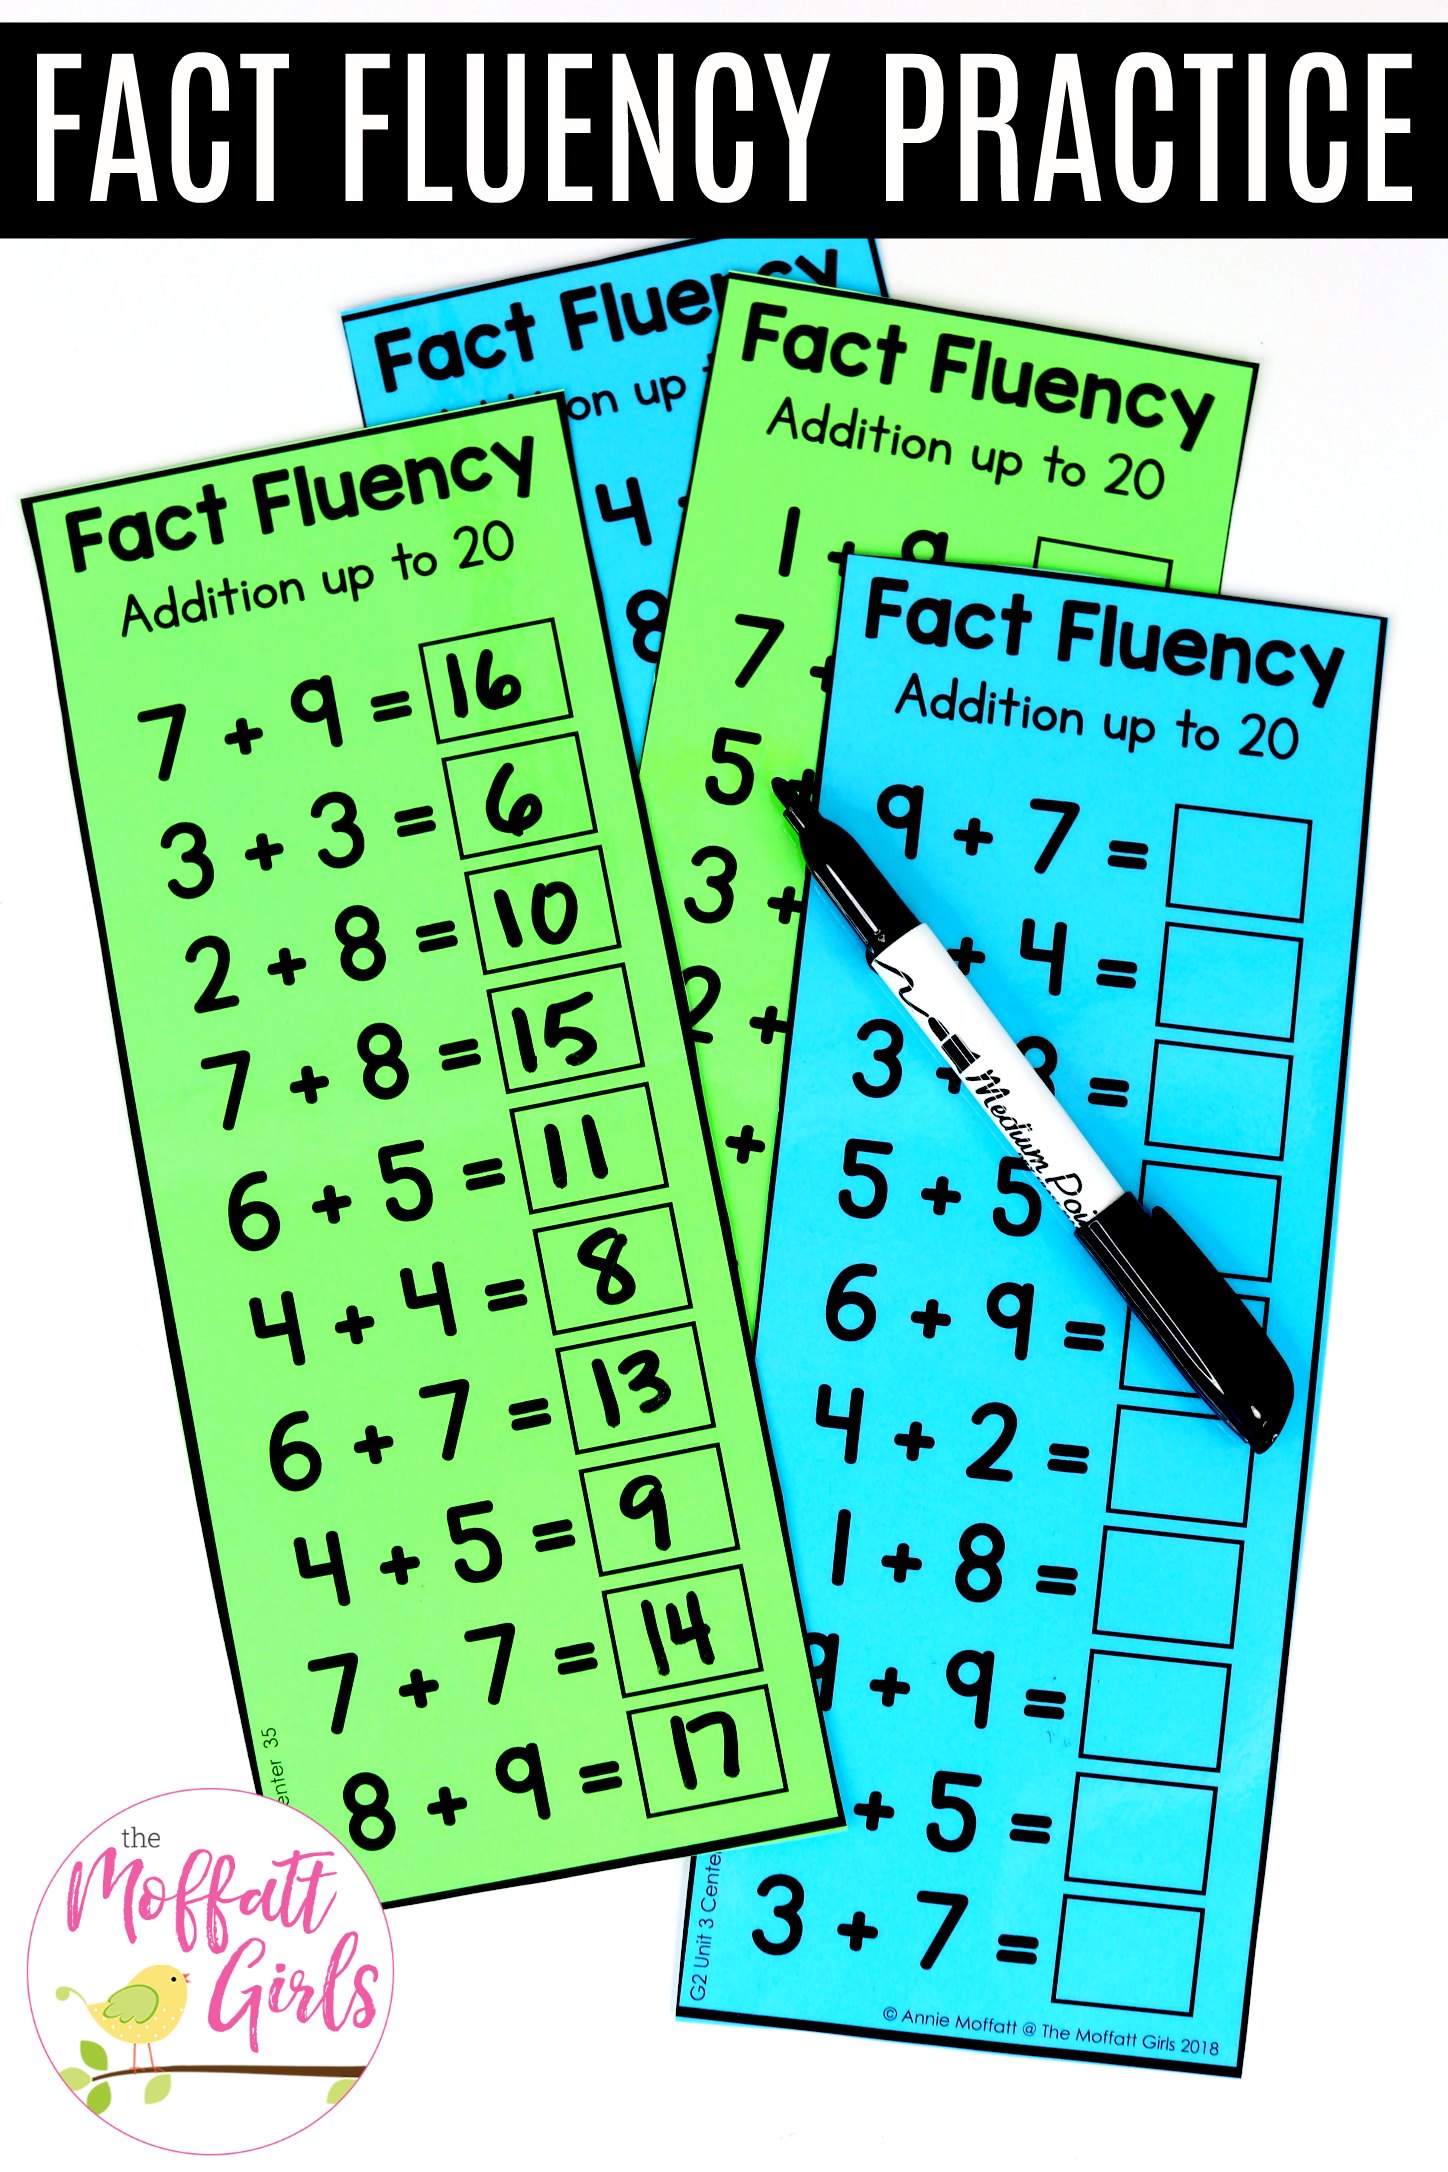 Fact Fluency Addition UP to 20 35C